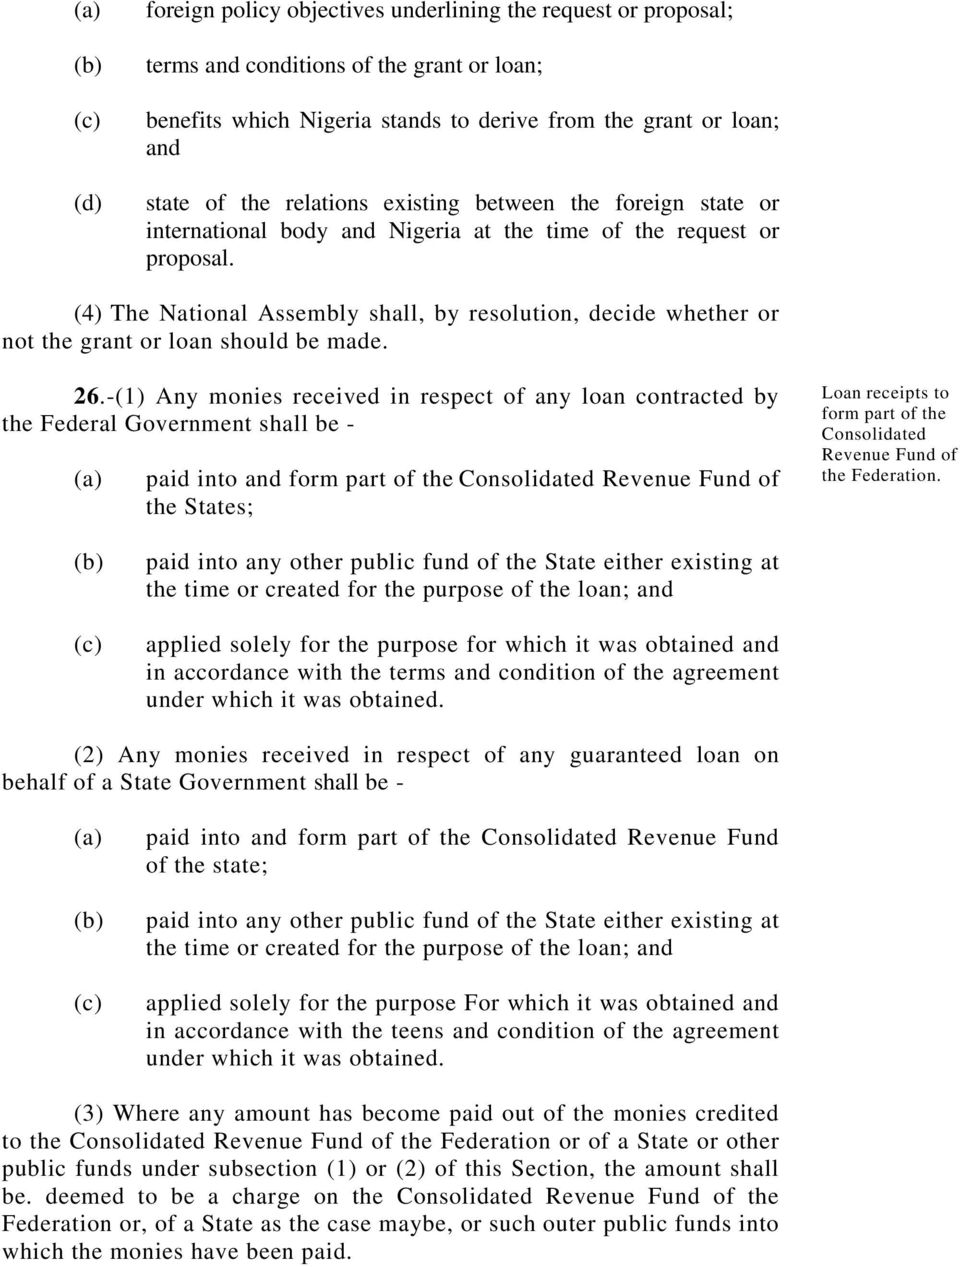 (4) The National Assembly shall, by resolution, decide whether or not the grant or loan should be made. 26.